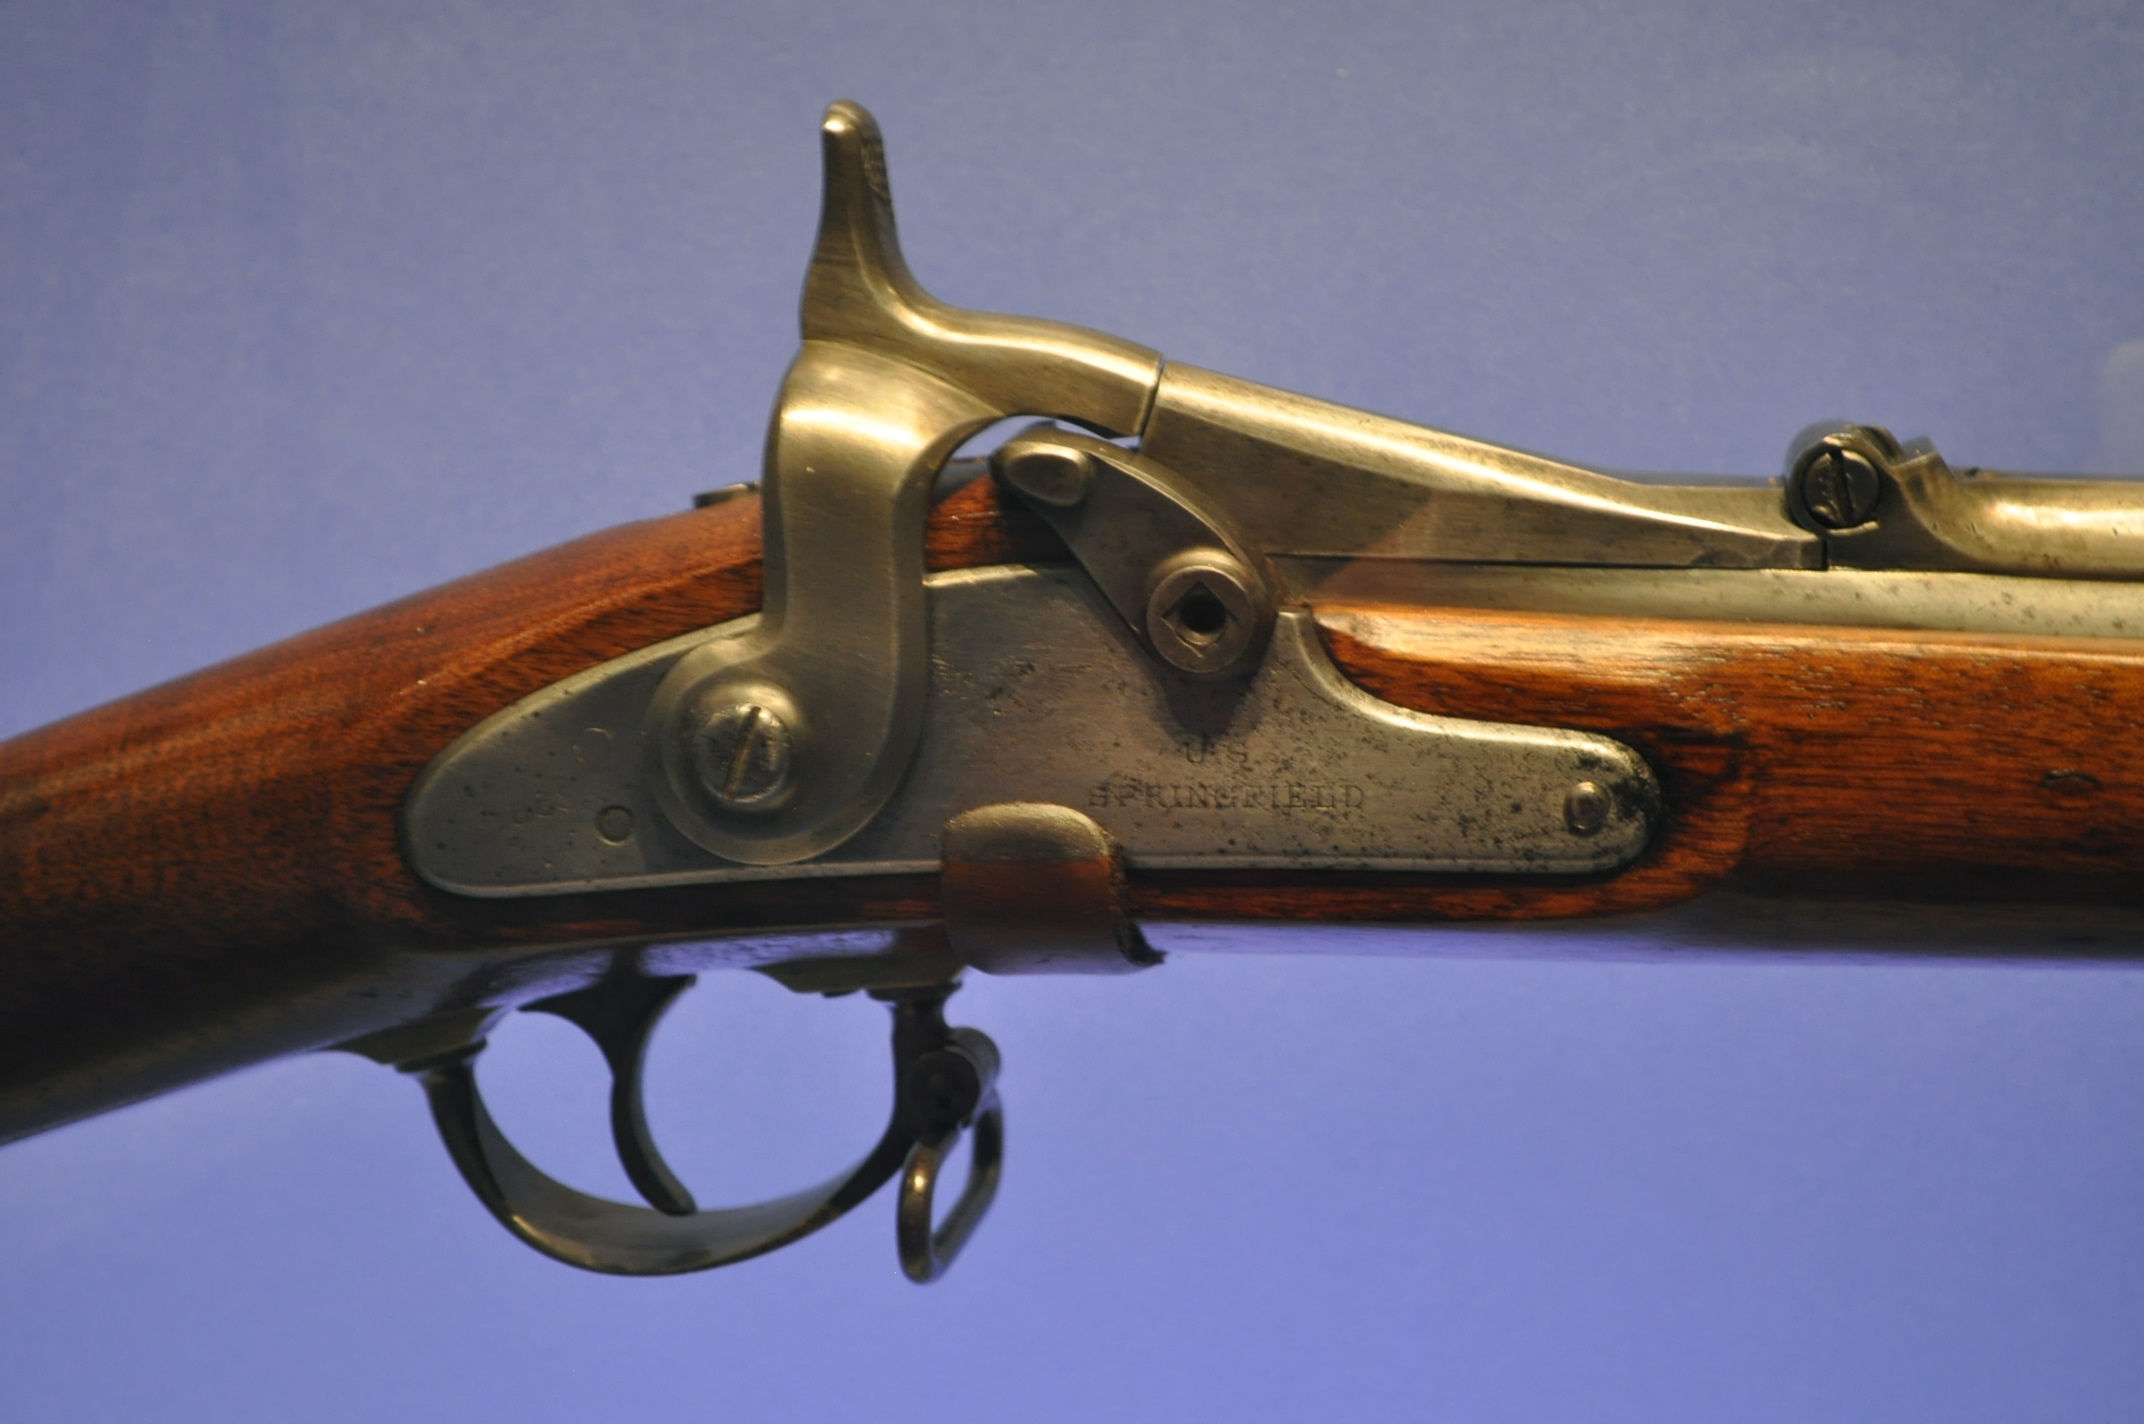 the antique gun is made in england